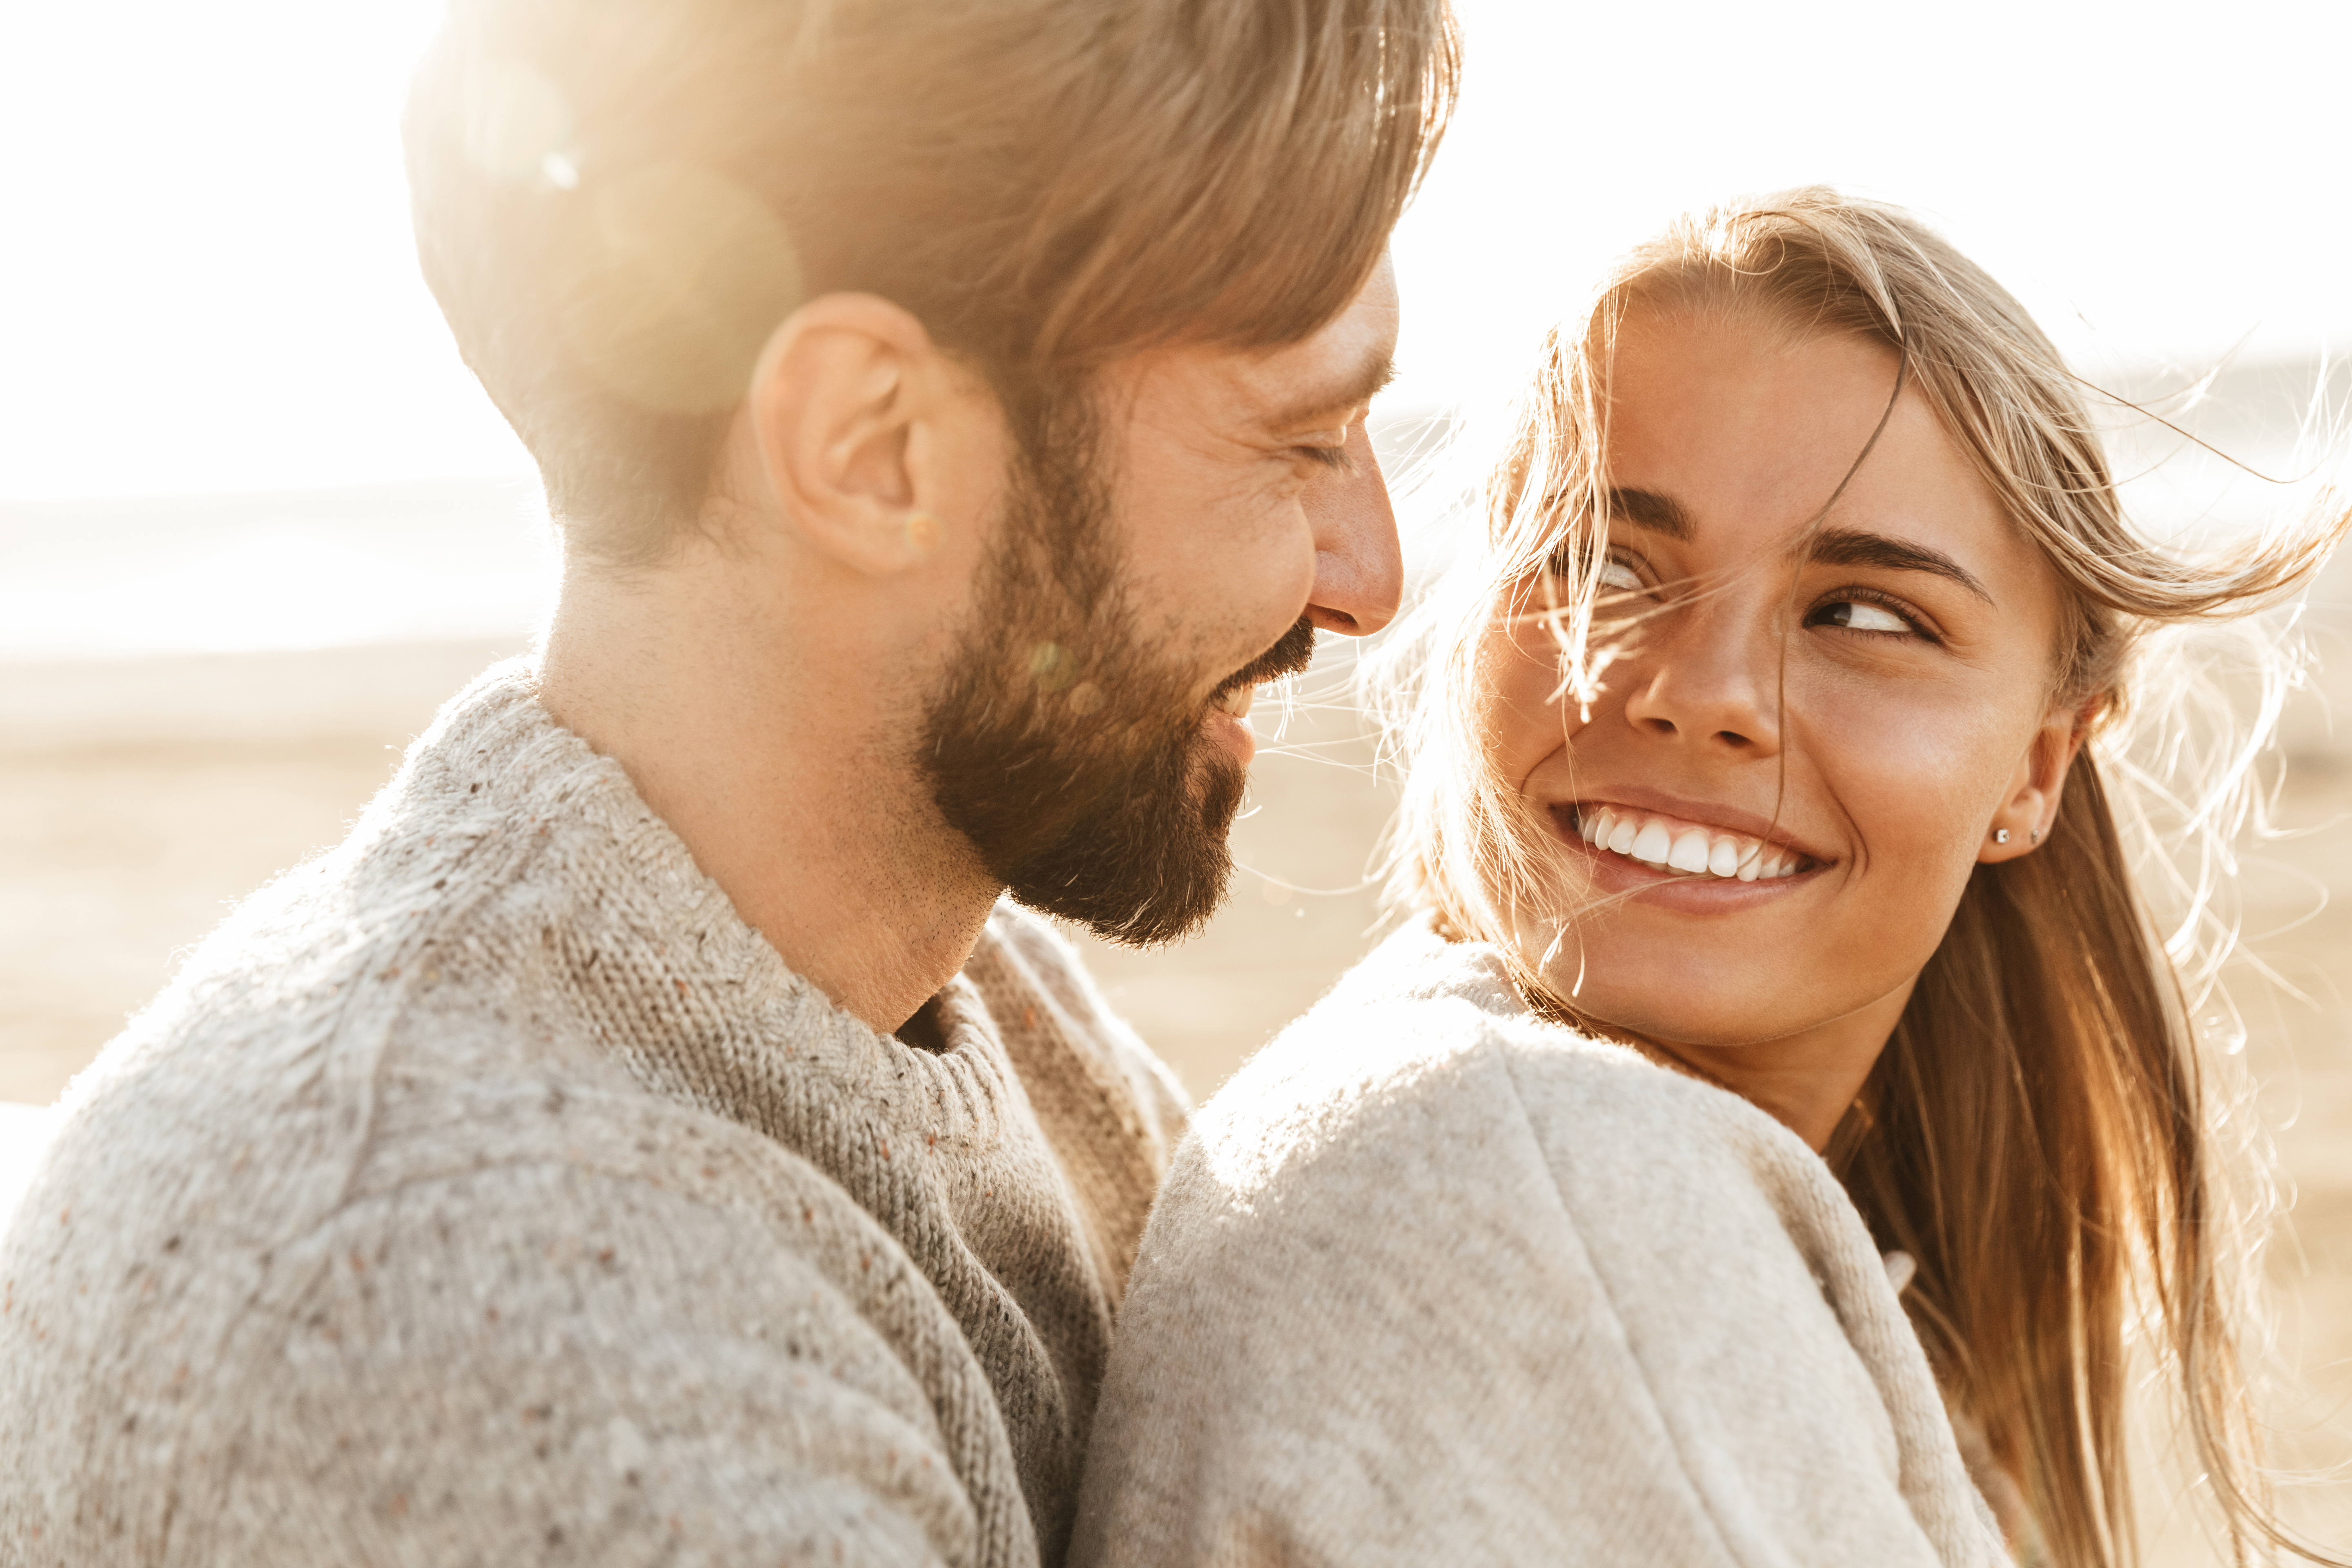 A man and woman smiling at each other | Source: Shutterstock